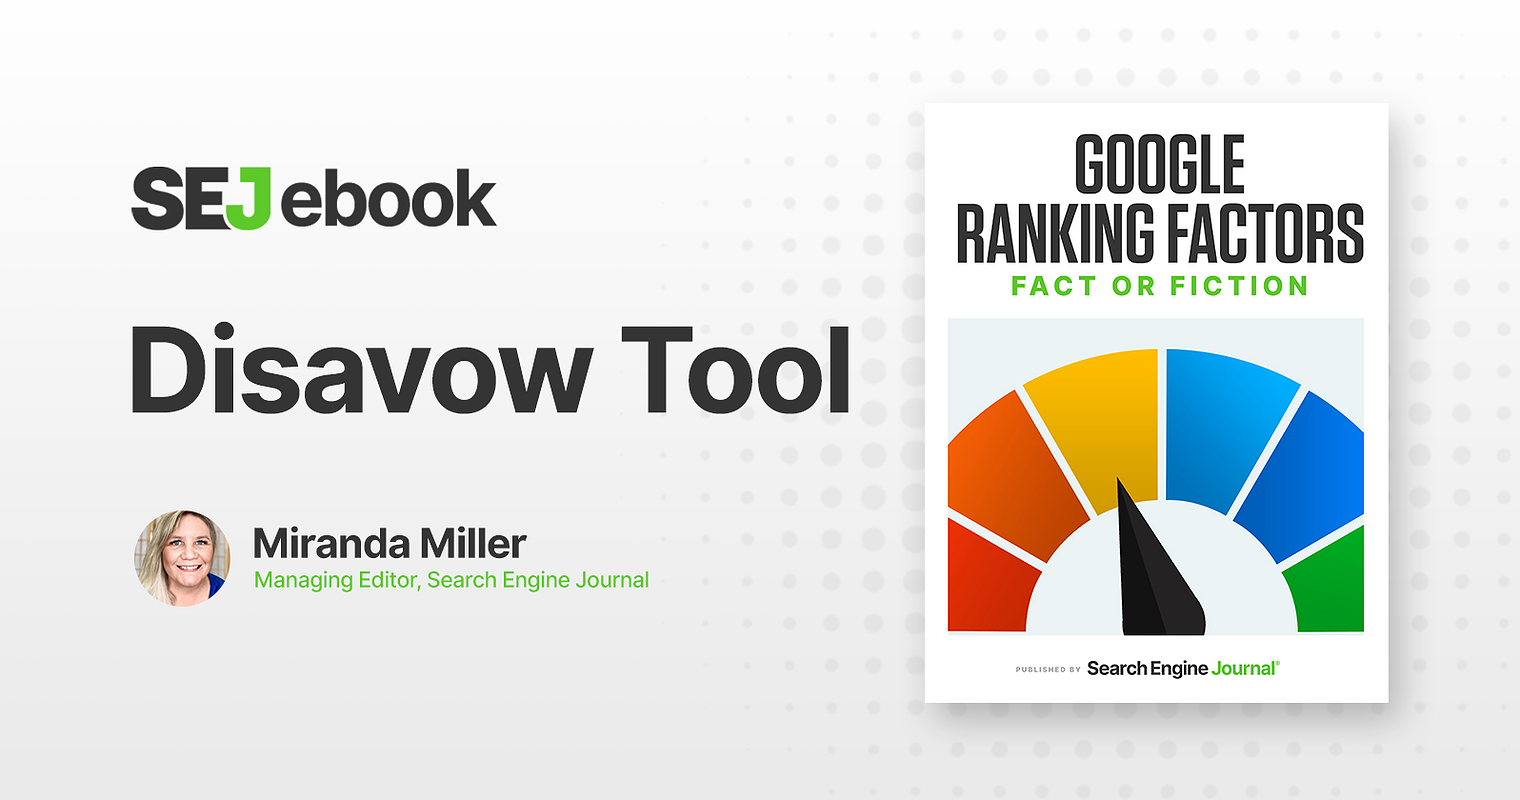 The Disavow Tool: Is It a Google Ranking Factor?